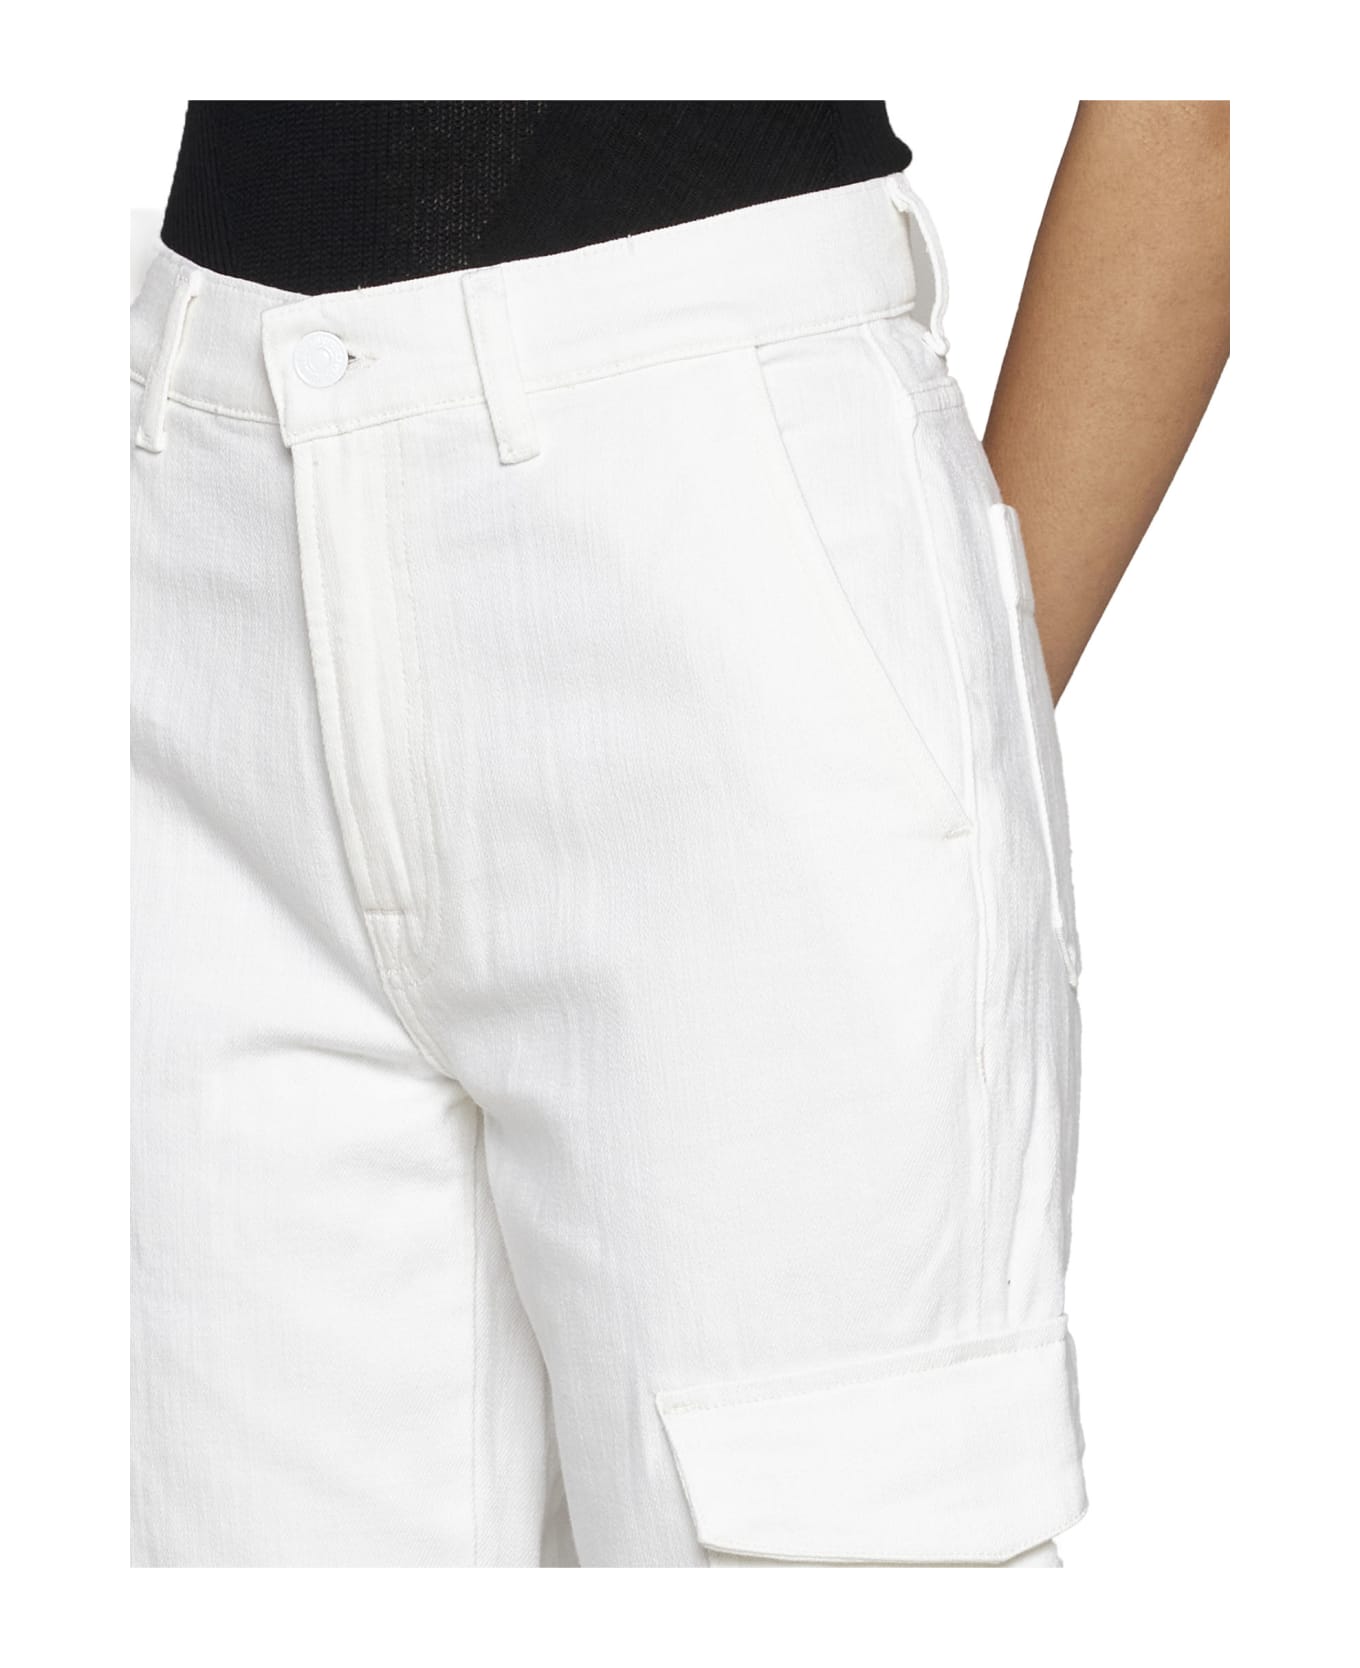 7 For All Mankind Jeans - White